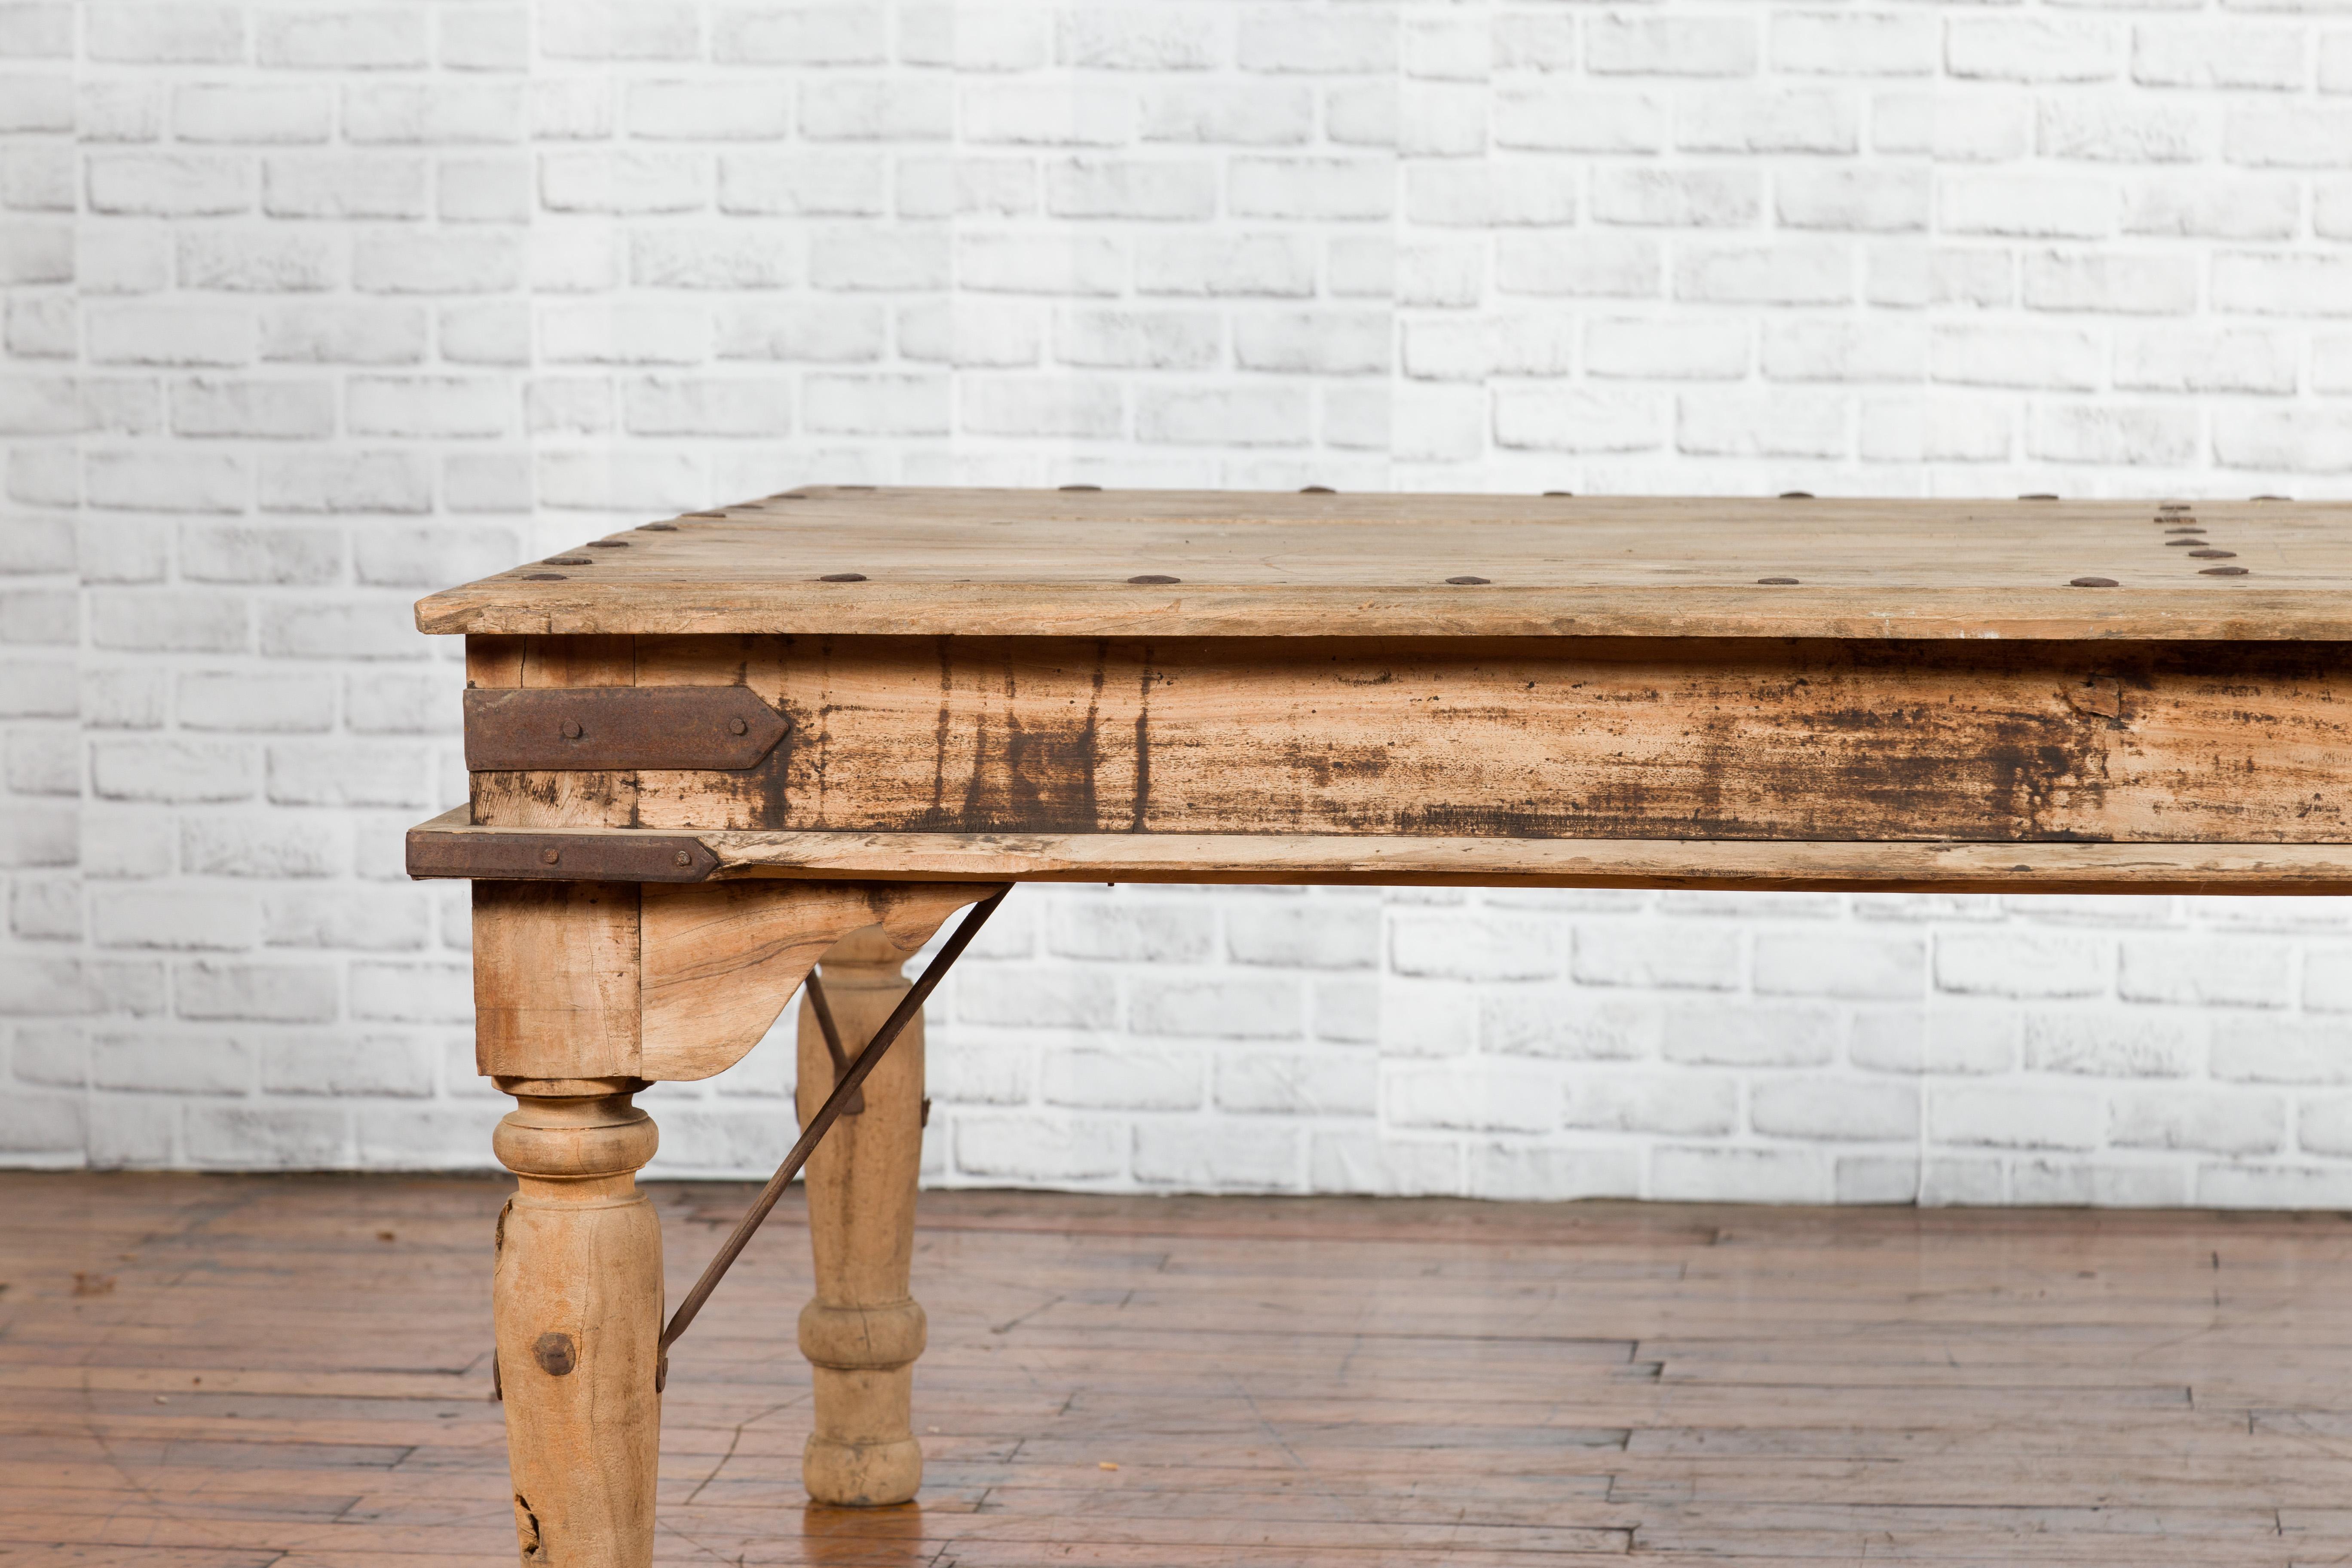 Rustic Indian Low Table with Distressed Patina, Iron Details and Baluster Legs For Sale 3